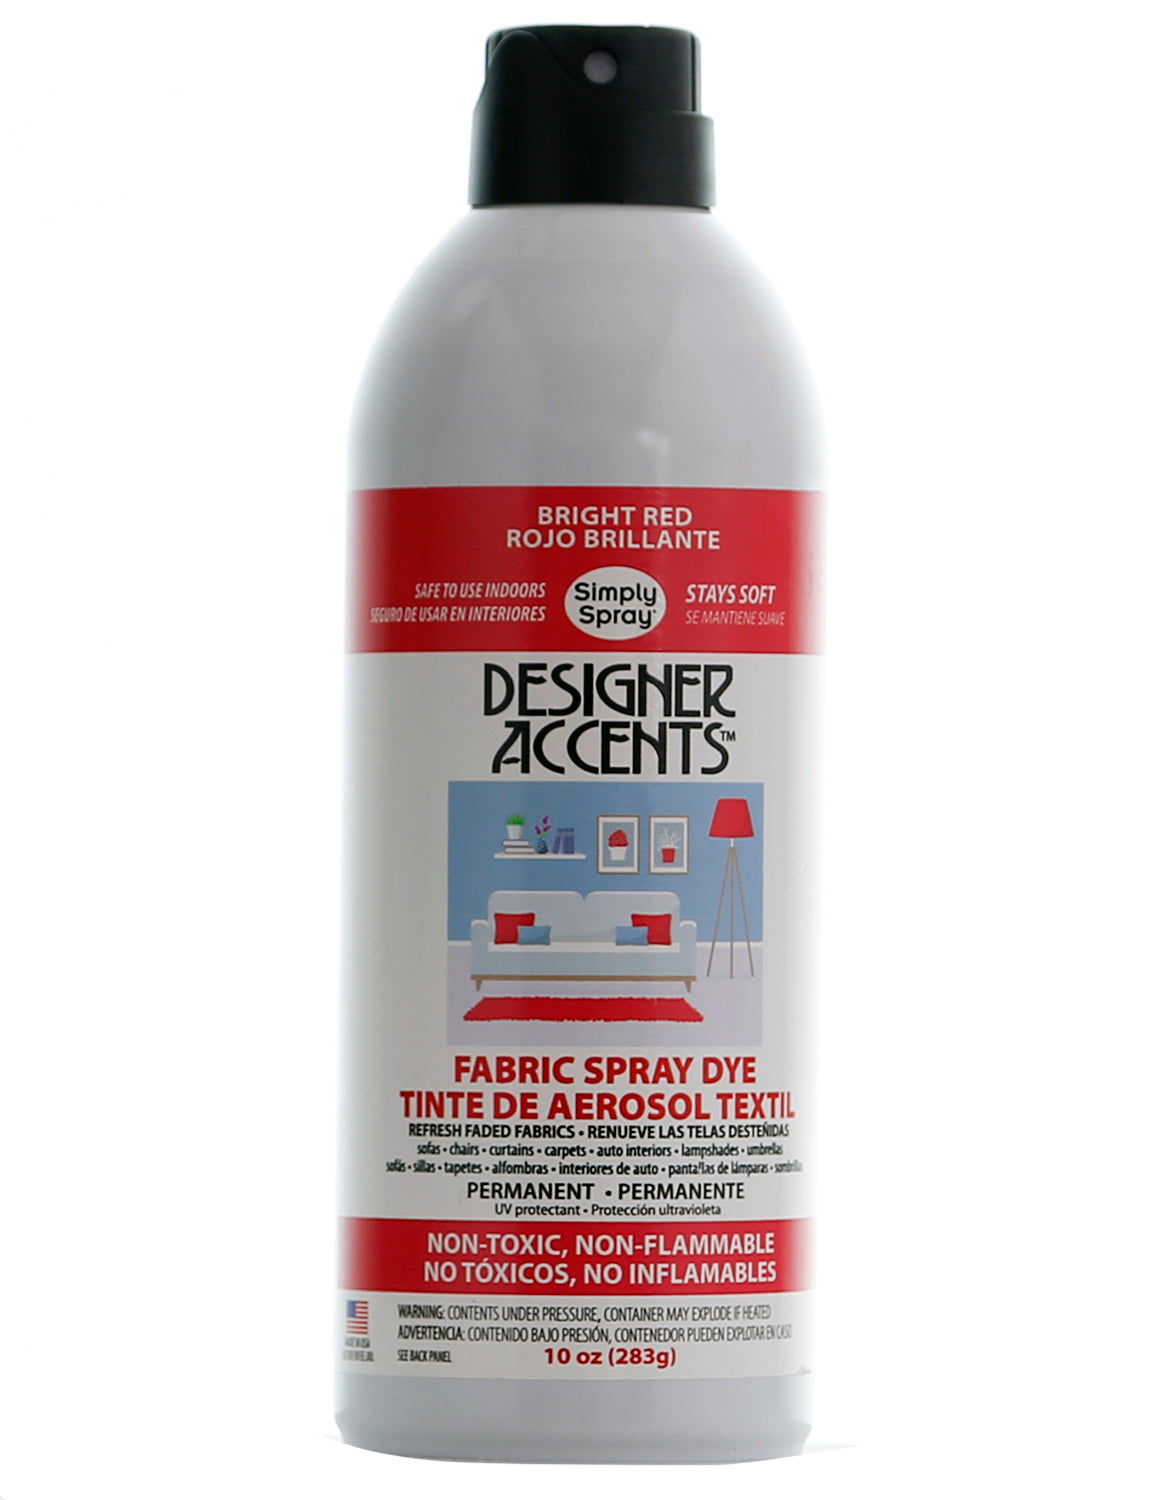 Designer Accents Fabric Paint Spray Dye by Simply Spray - Red